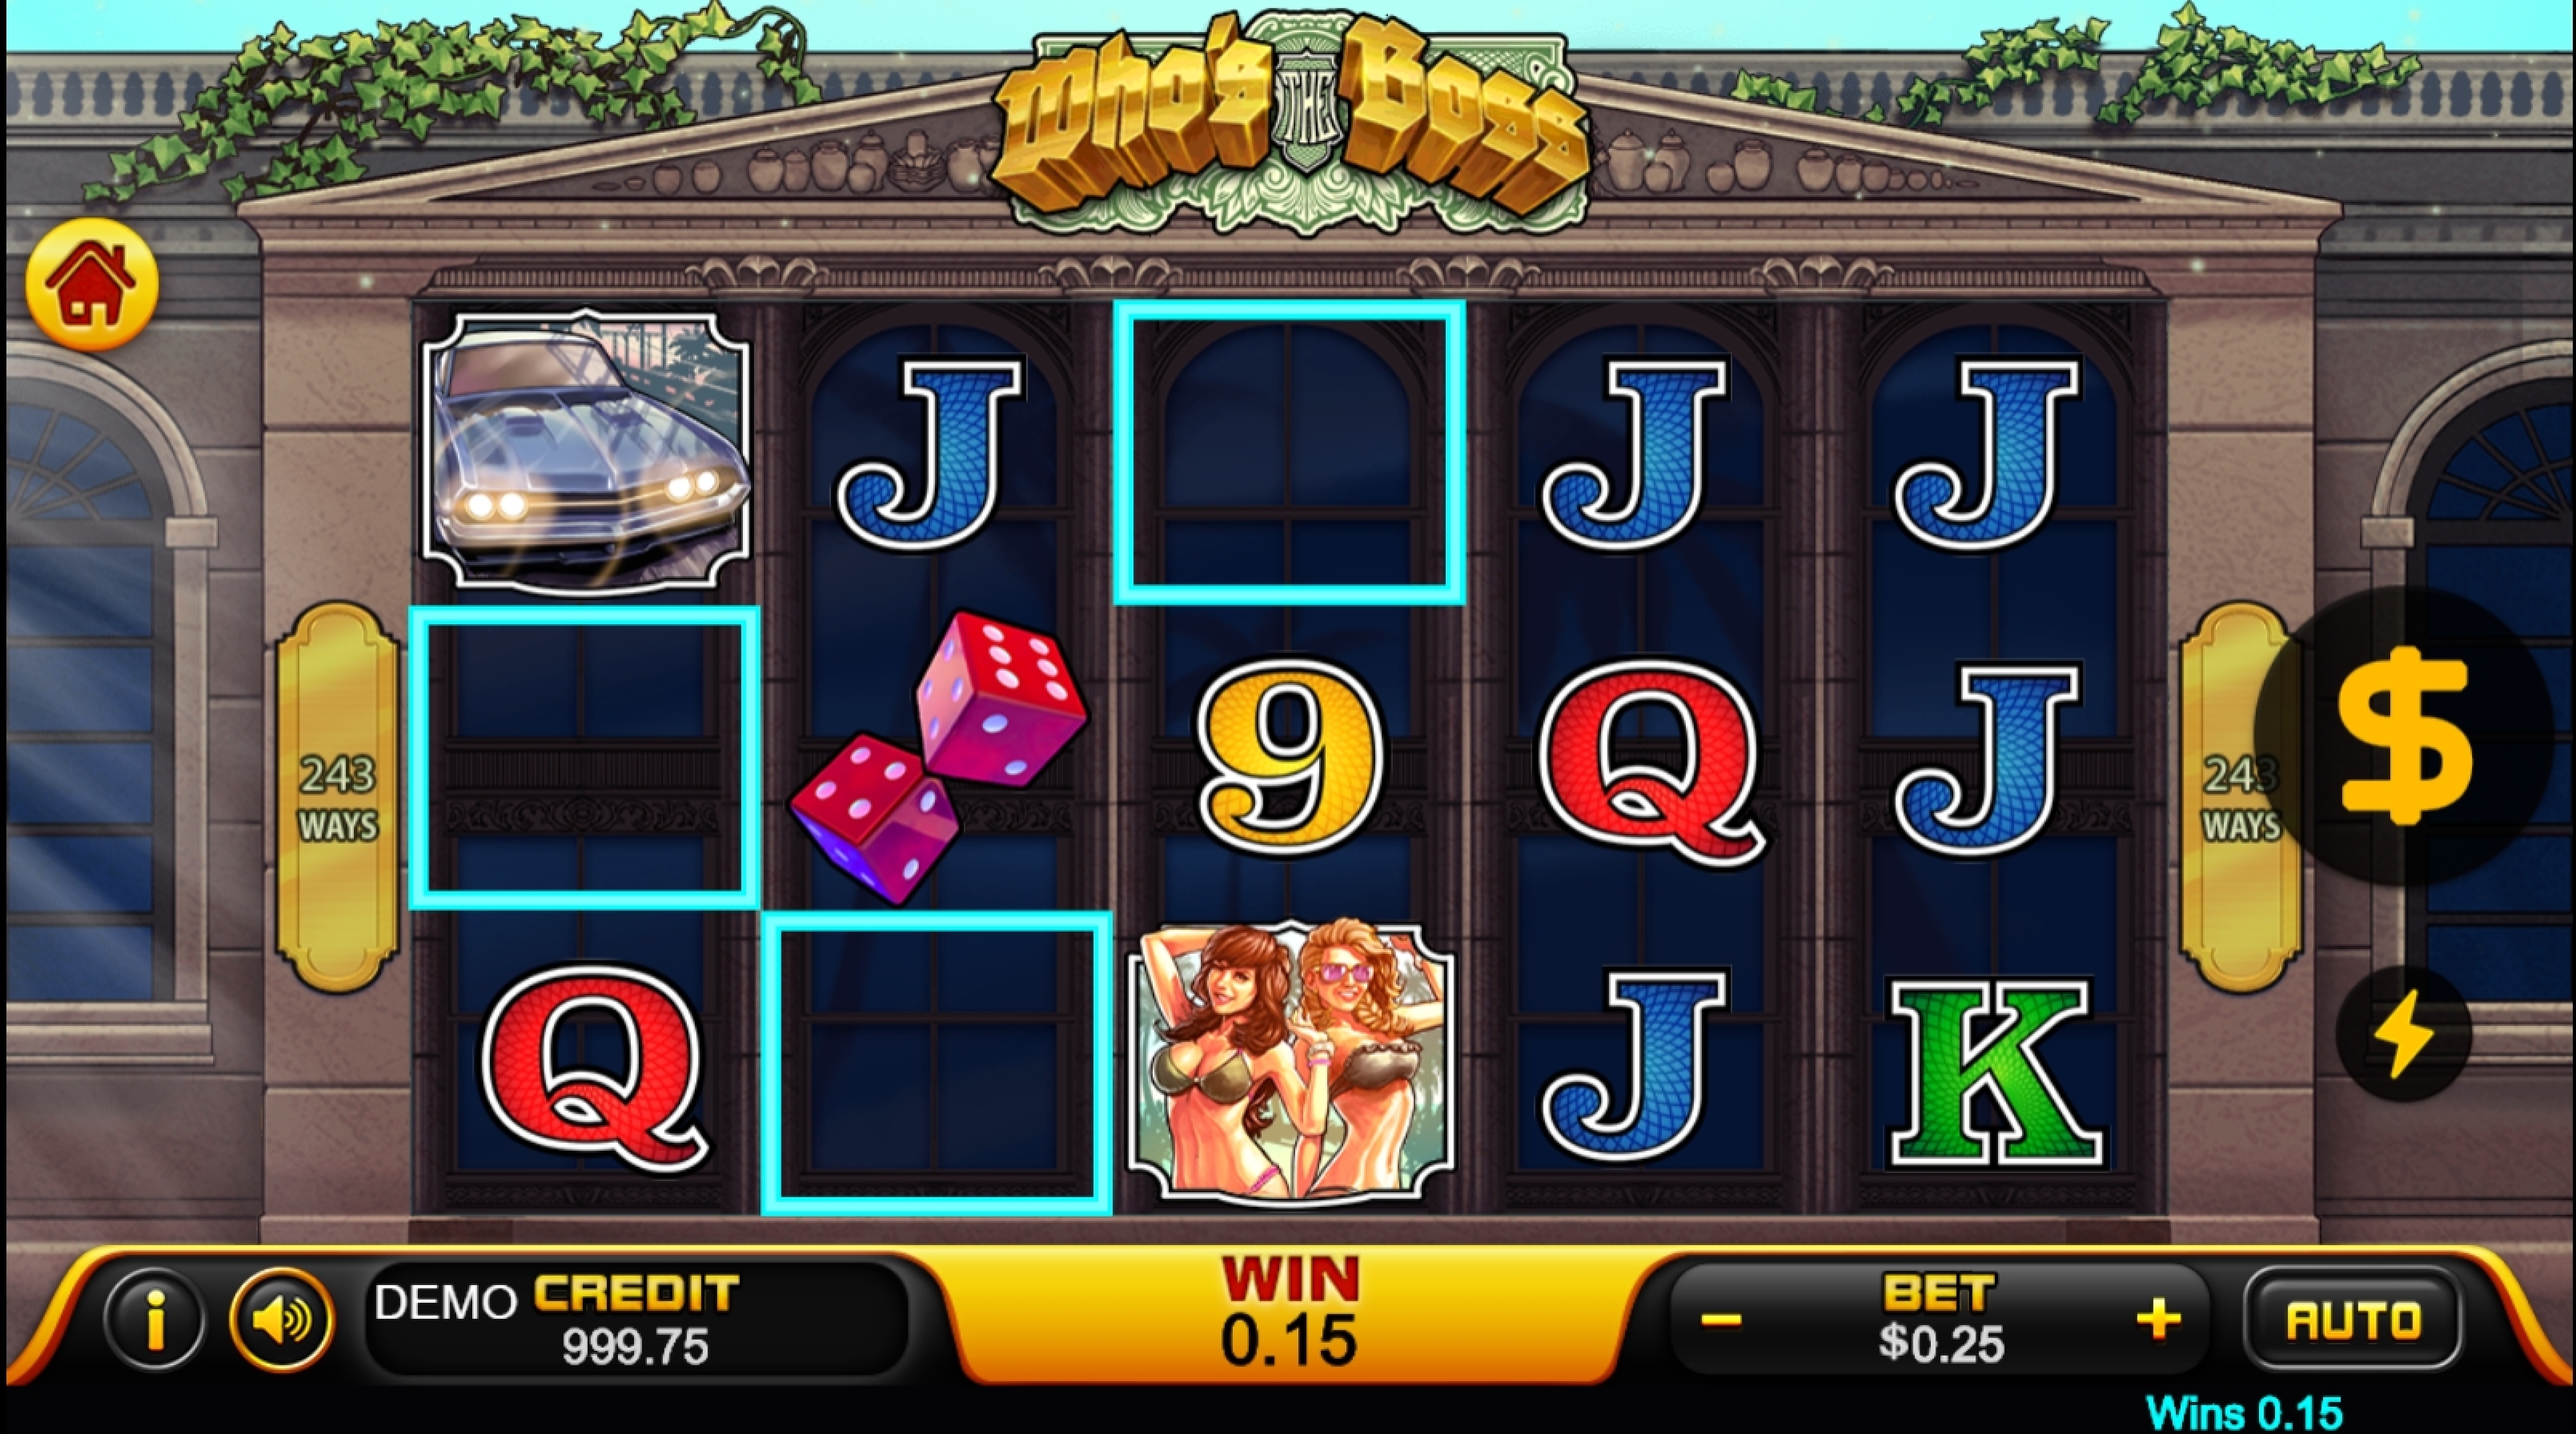 Win Money in Who's The Boss Free Slot Game by PlayStar